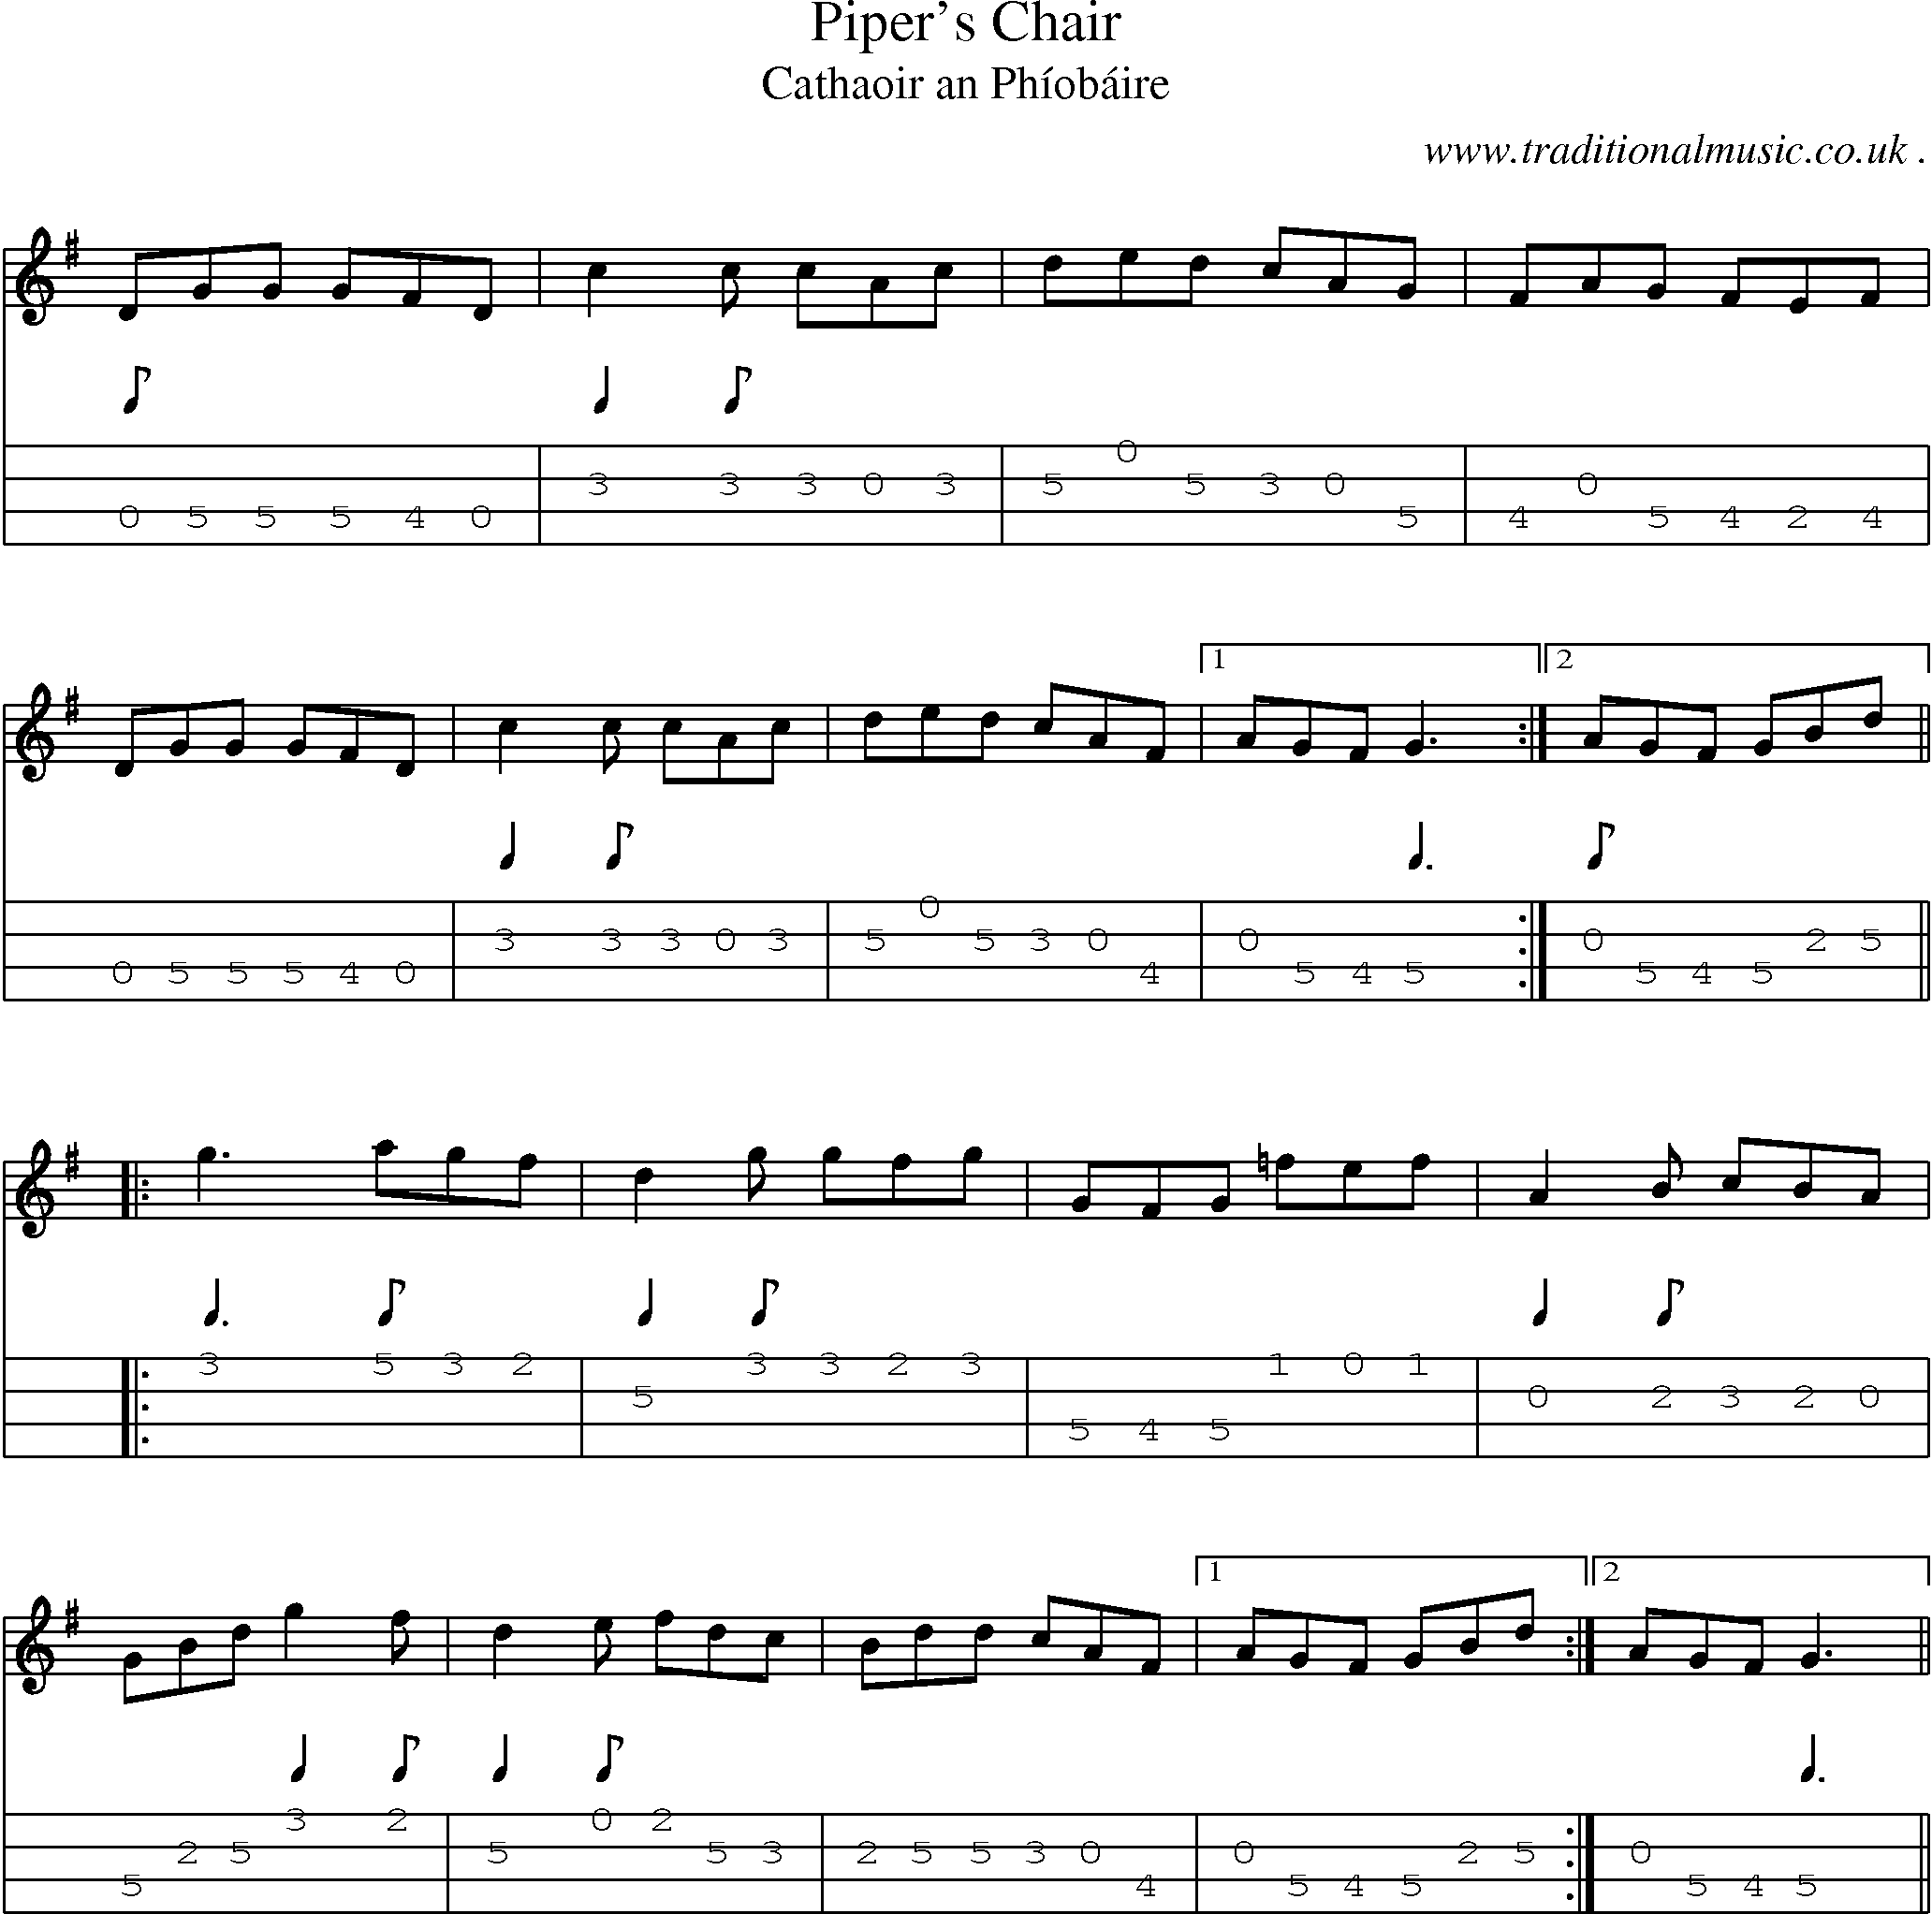 Sheet-Music and Mandolin Tabs for Pipers Chair